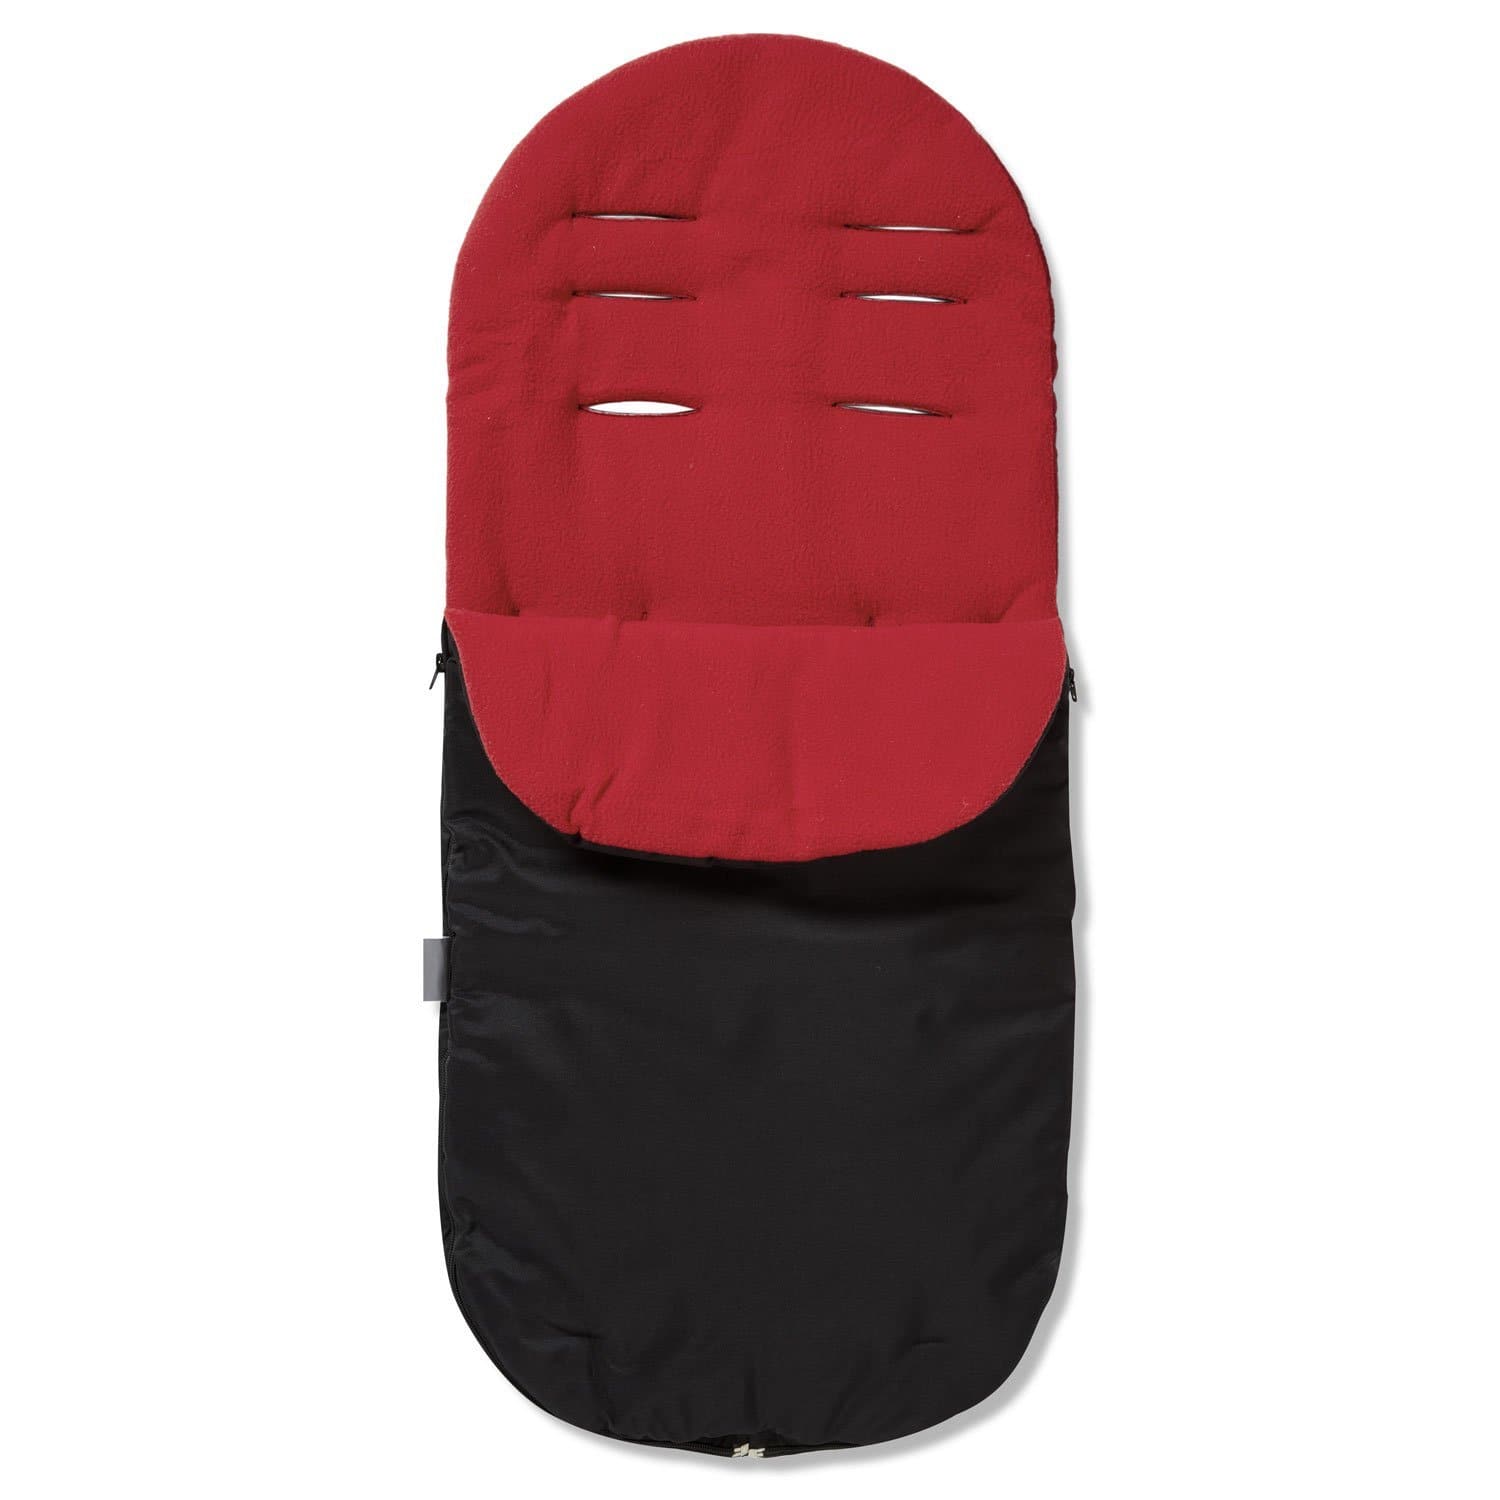 Footmuff / Cosy Toes Compatible with Mee-Go - Red / Fits All Models | For Your Little One